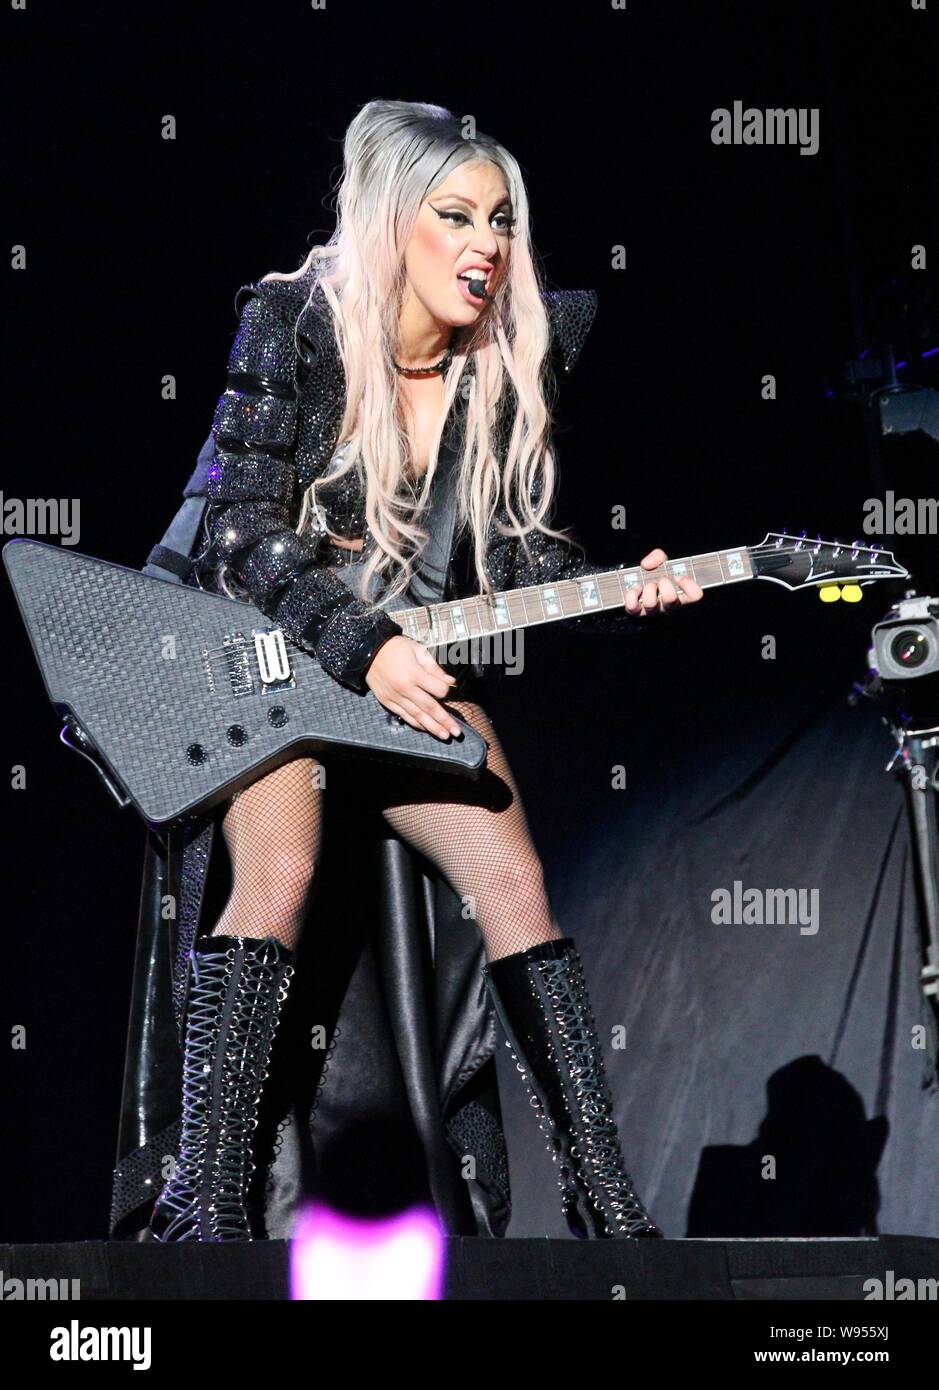 US pop star Lady Gaga performs during her Born This Way Ball Asia tour  concert in Taipei, Taiwan, 18 May 2012. Lady Gaga fired up the audience at  he Stock Photo - Alamy